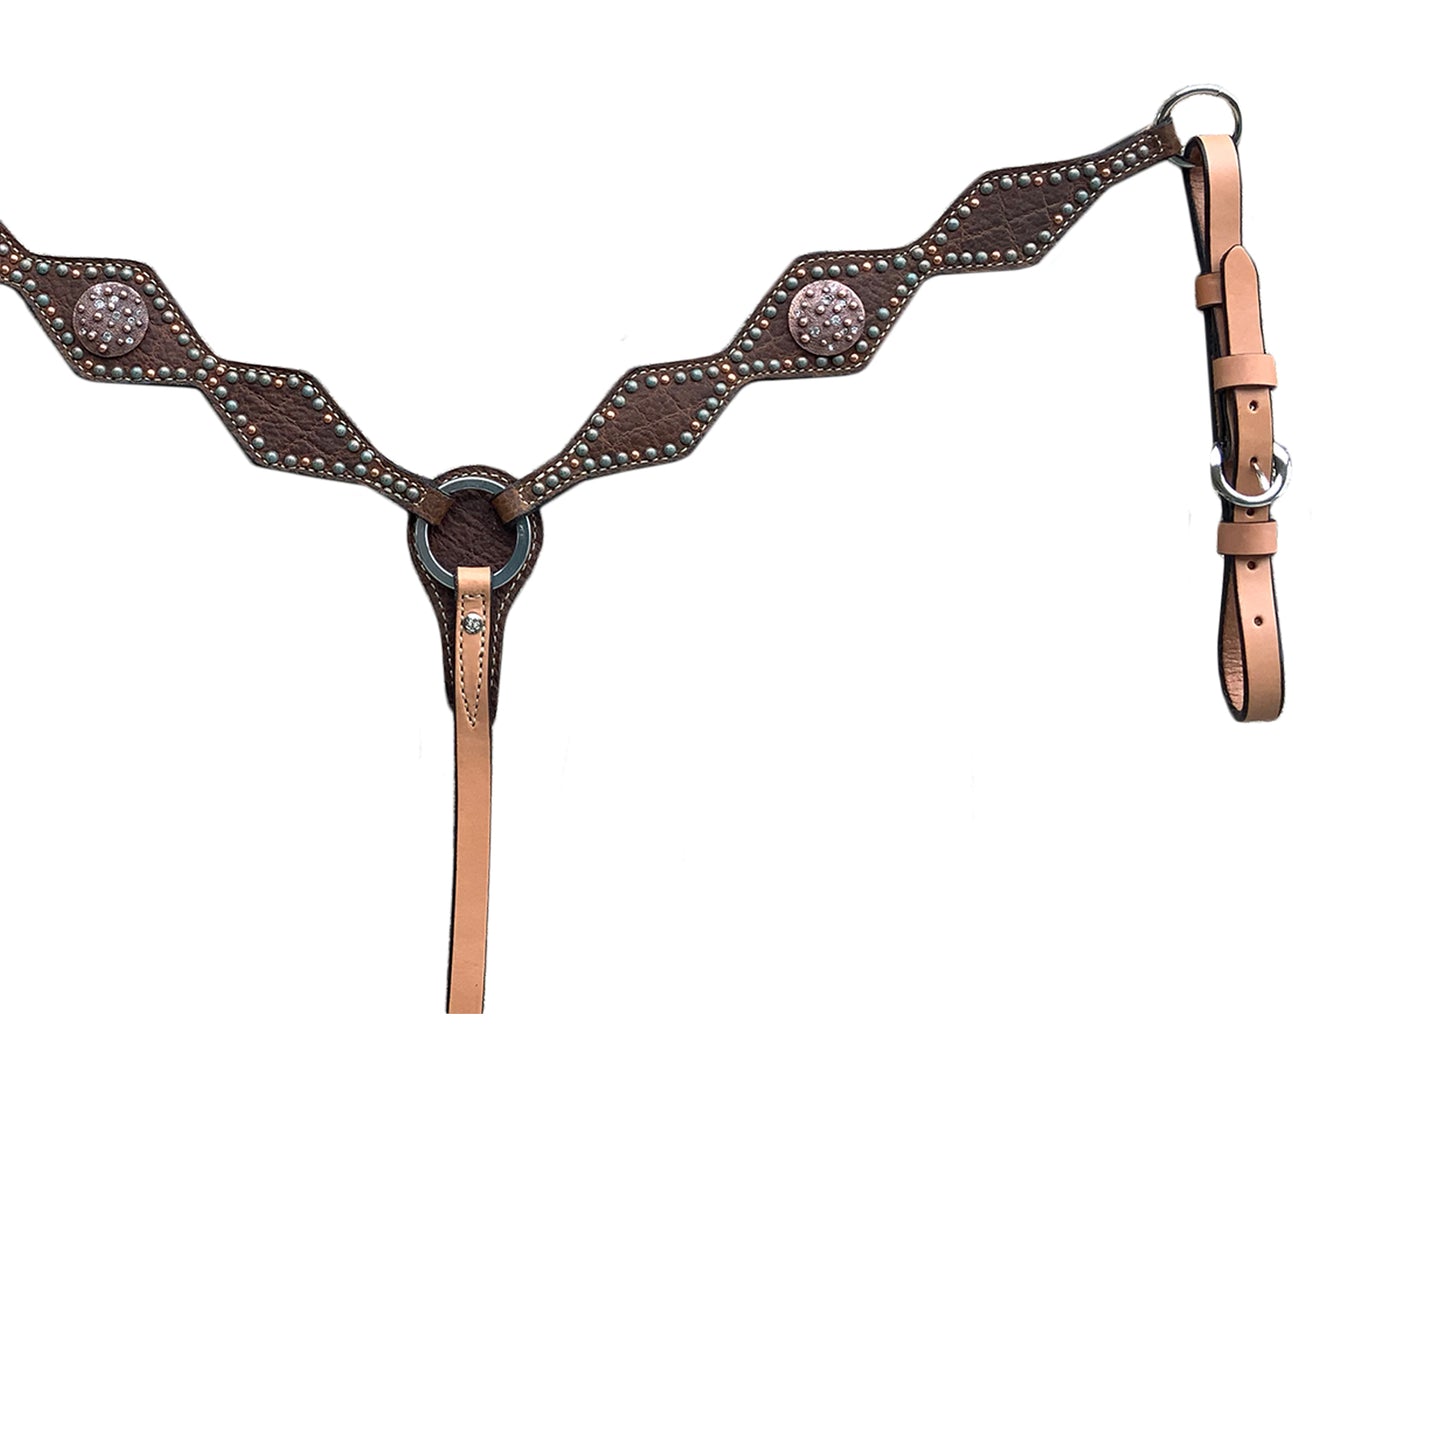 2-1/2" Diamond breast collar rough out golden leather redwood elephant overlay with patina spots and copper spots.